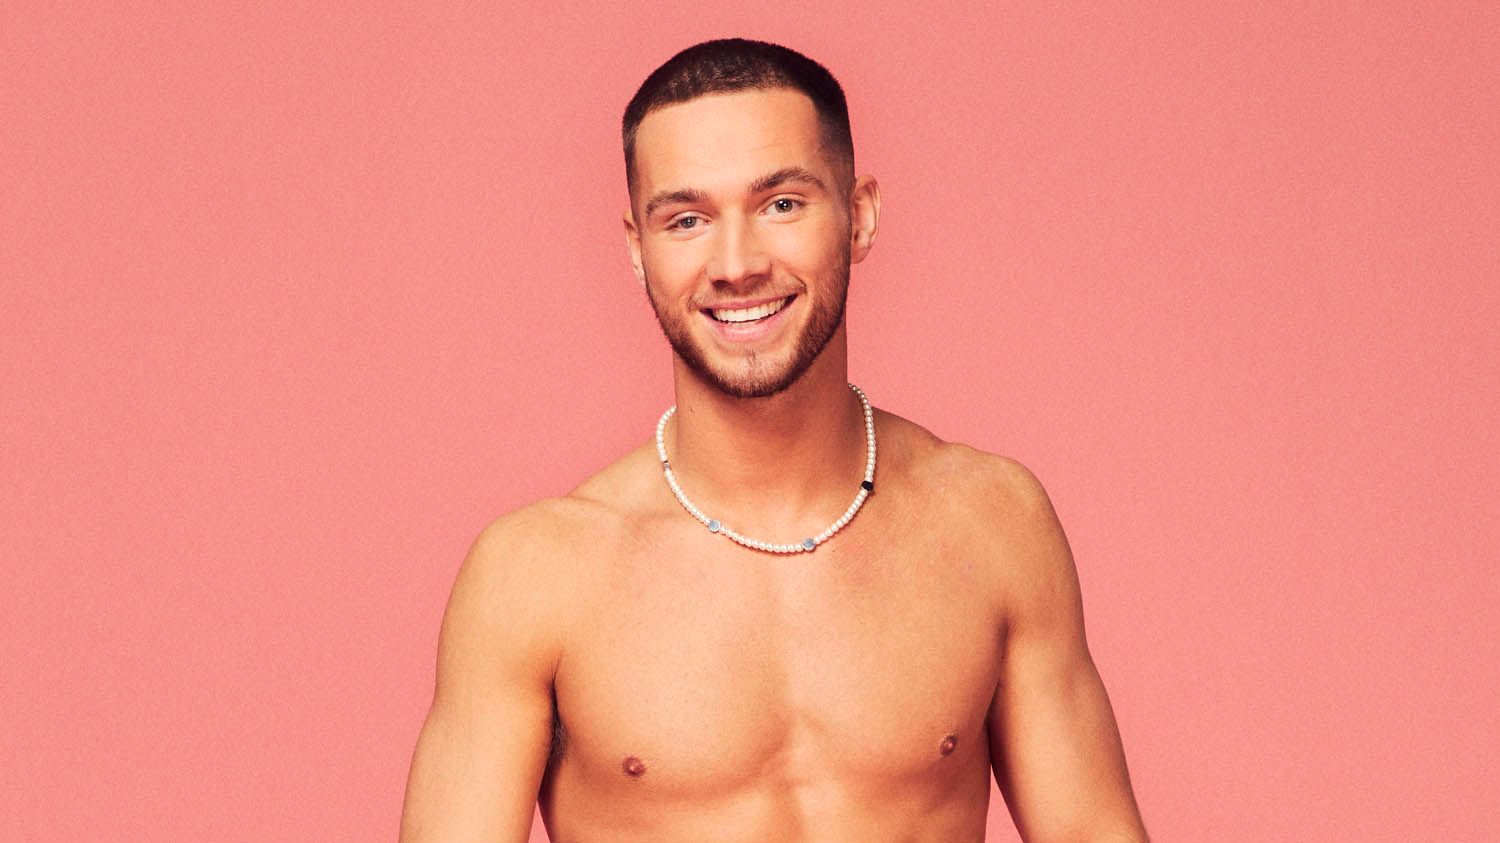 Essex man unveiled as first partially sighted Love Island contestant